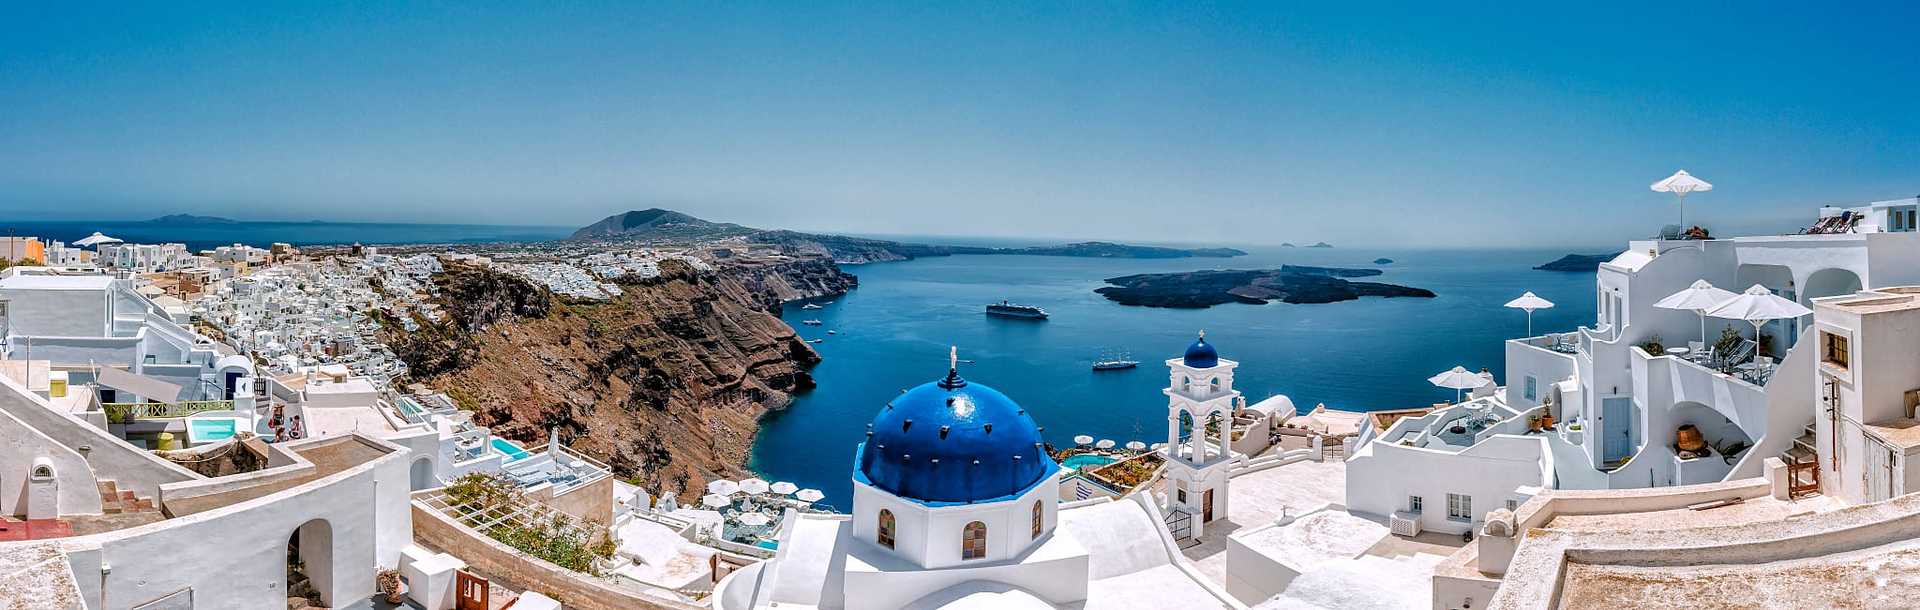 View of caldera from Santorini blue domed buildings.